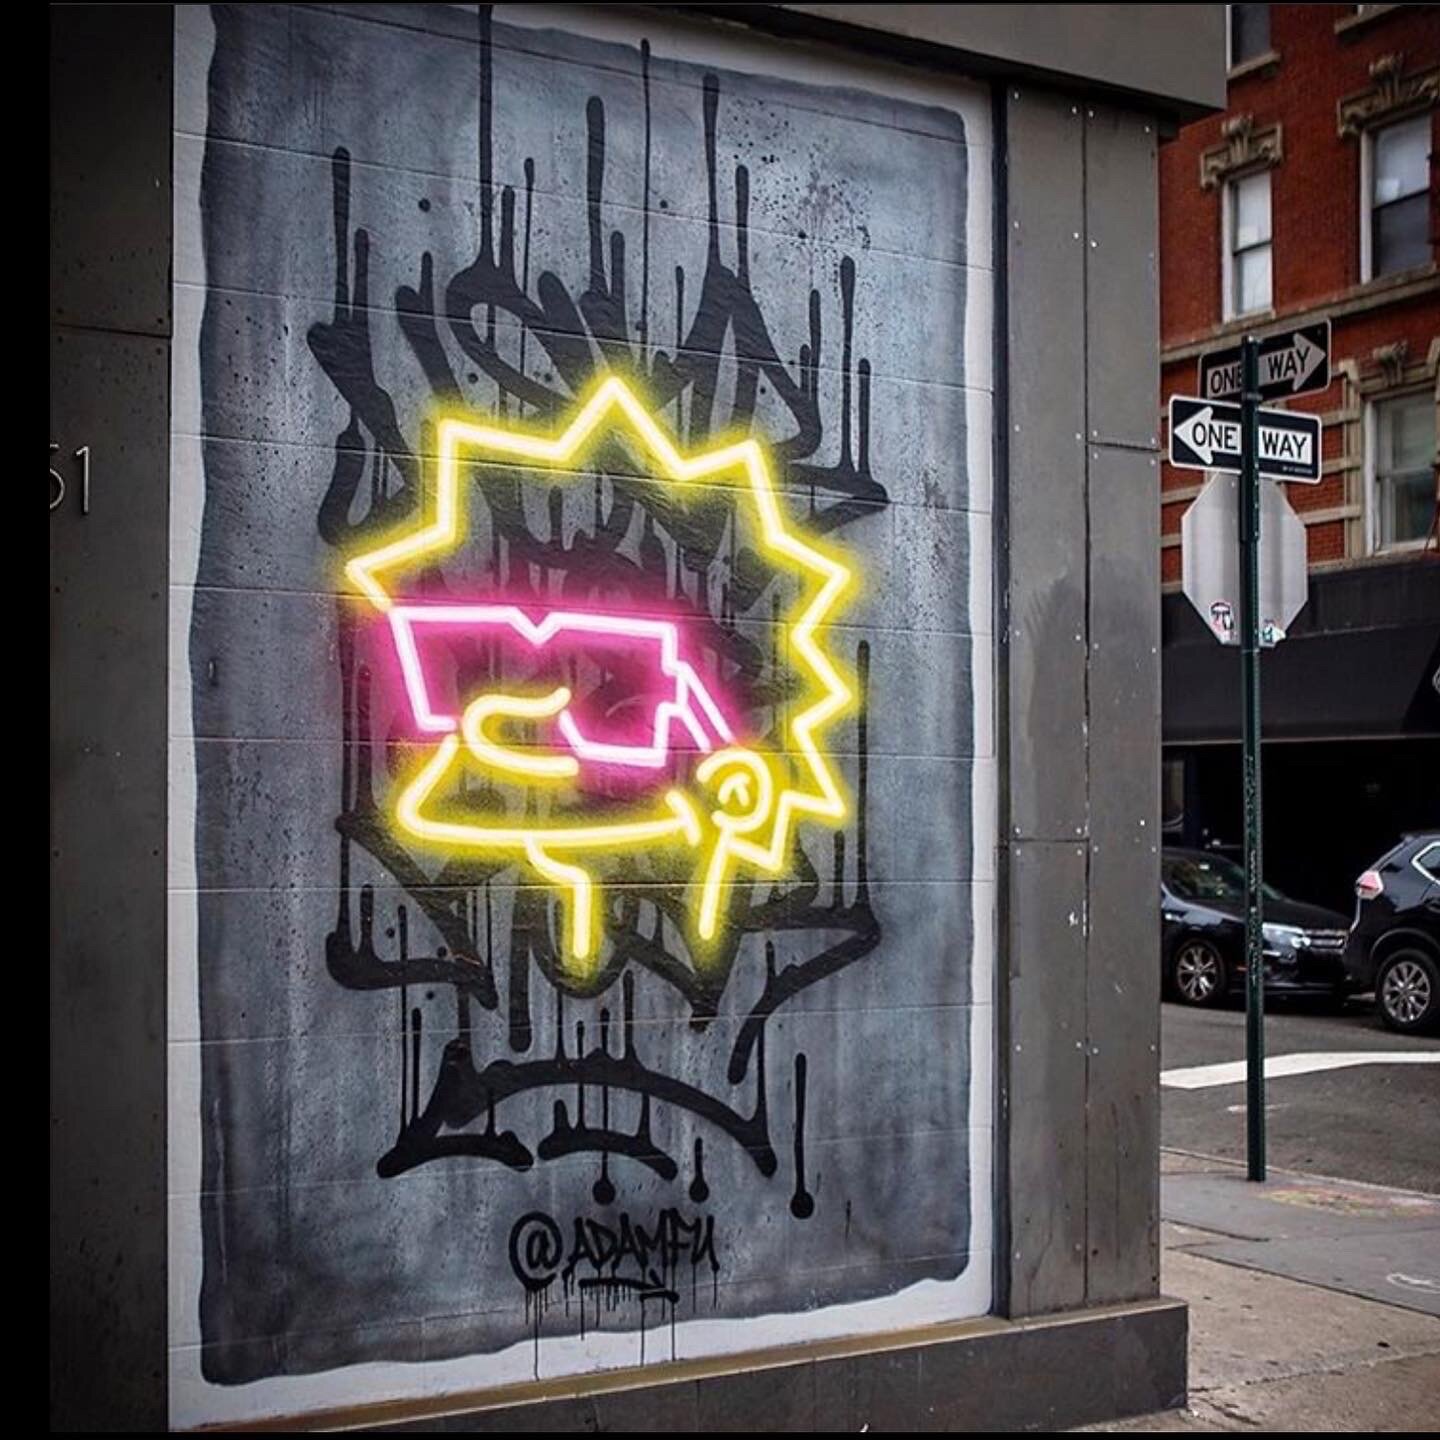 Artist Adam Fu has mastered creating neon effects with spray paint